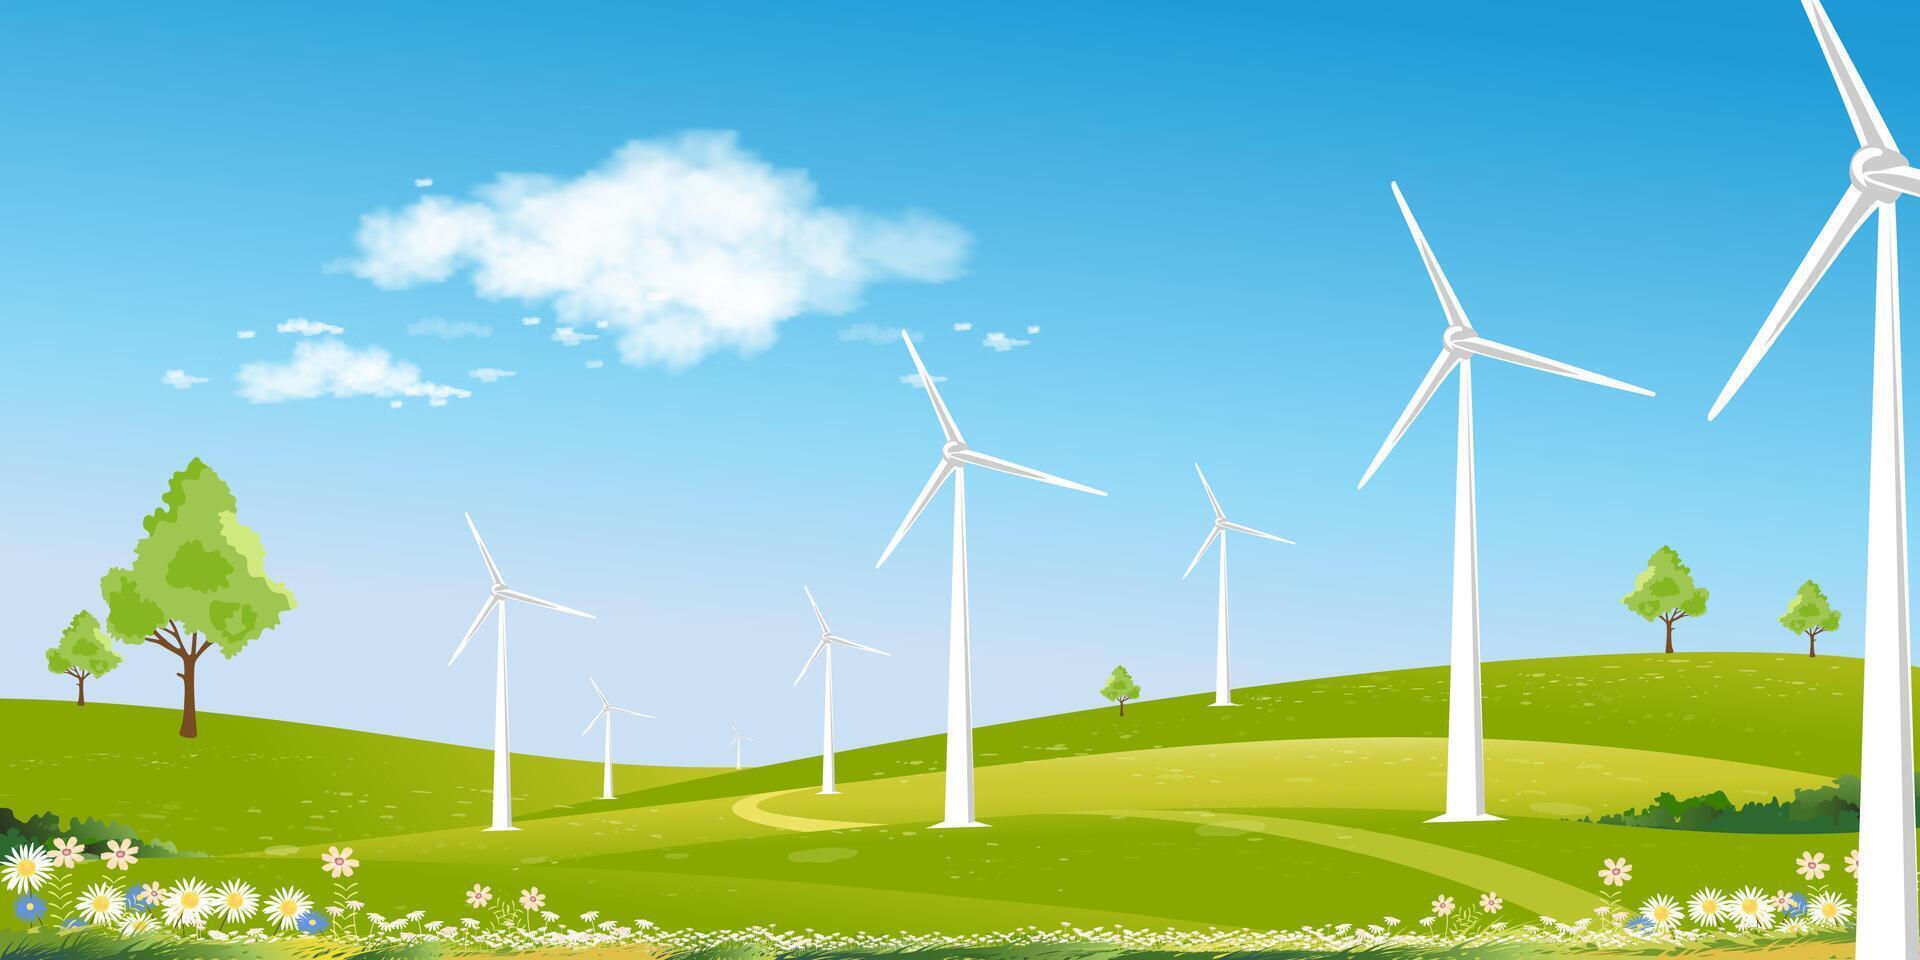 Environmental Background,Spring landscape green field with windmill on mountain,blue sky,cloud,Vector Rural with Solar panel wind turbines installed as renewable station energy sources for electricity vector